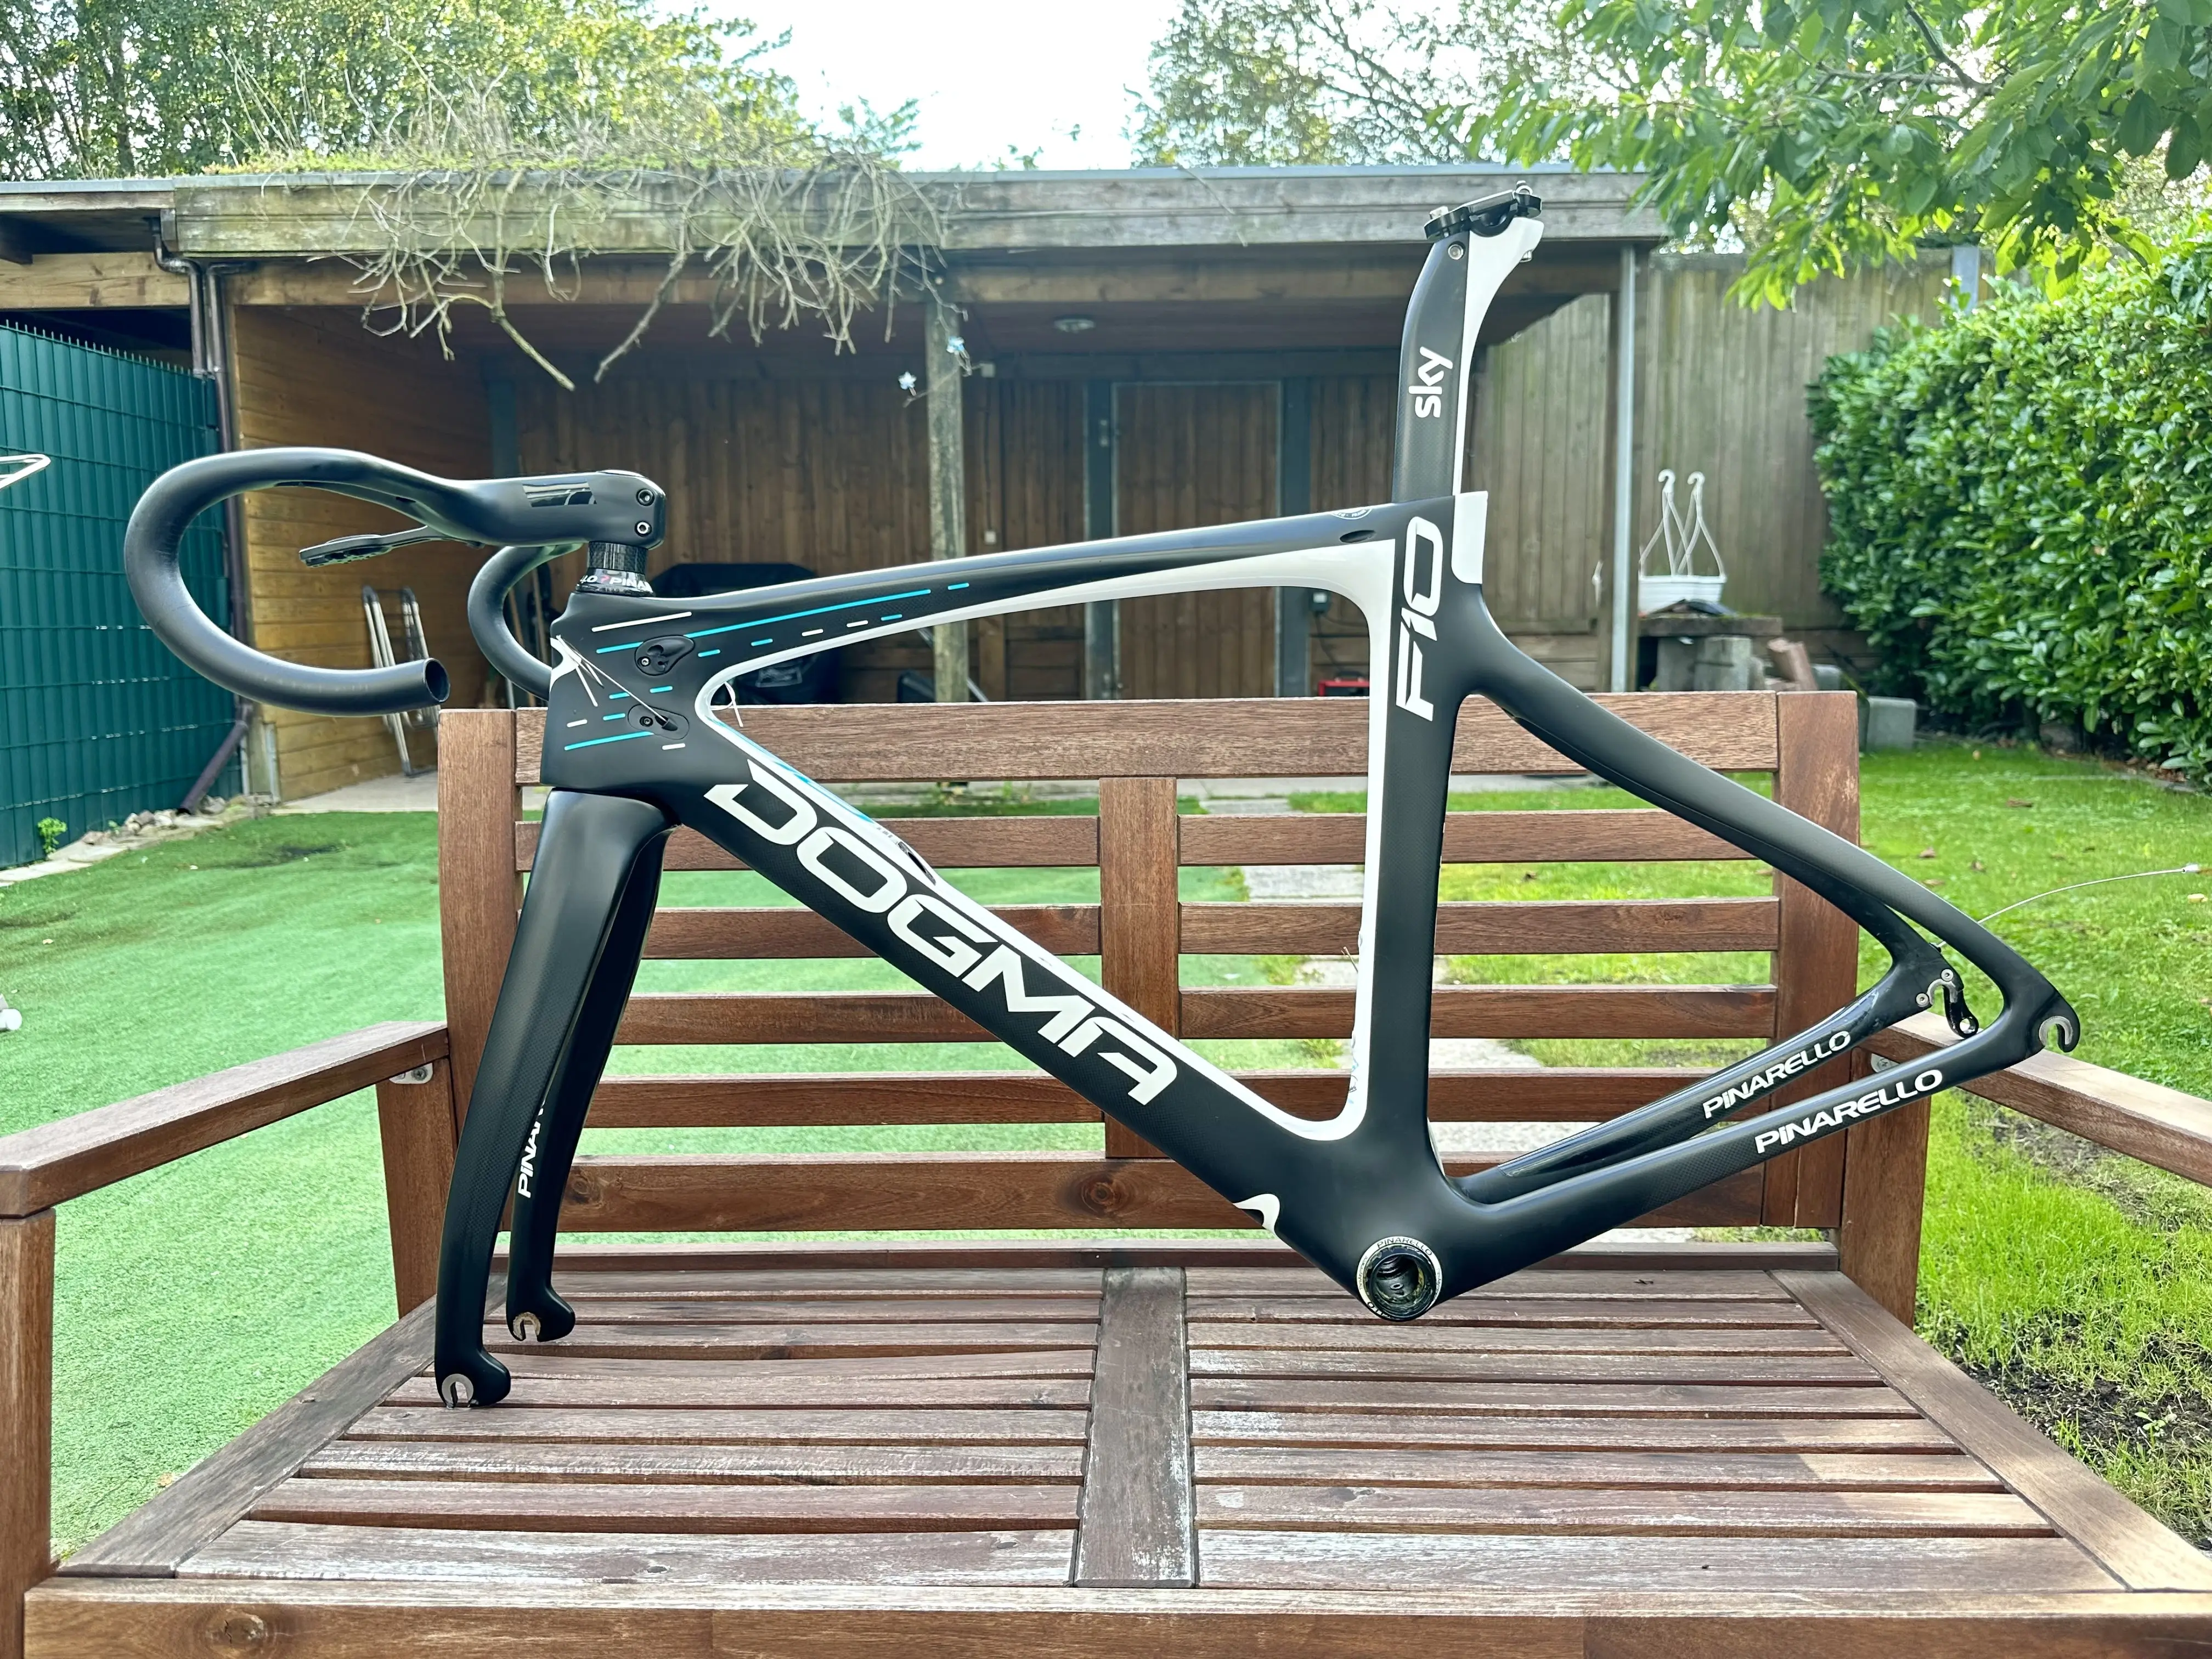 Pinarello DOGMA F10 Team Sky used in M | buycycle